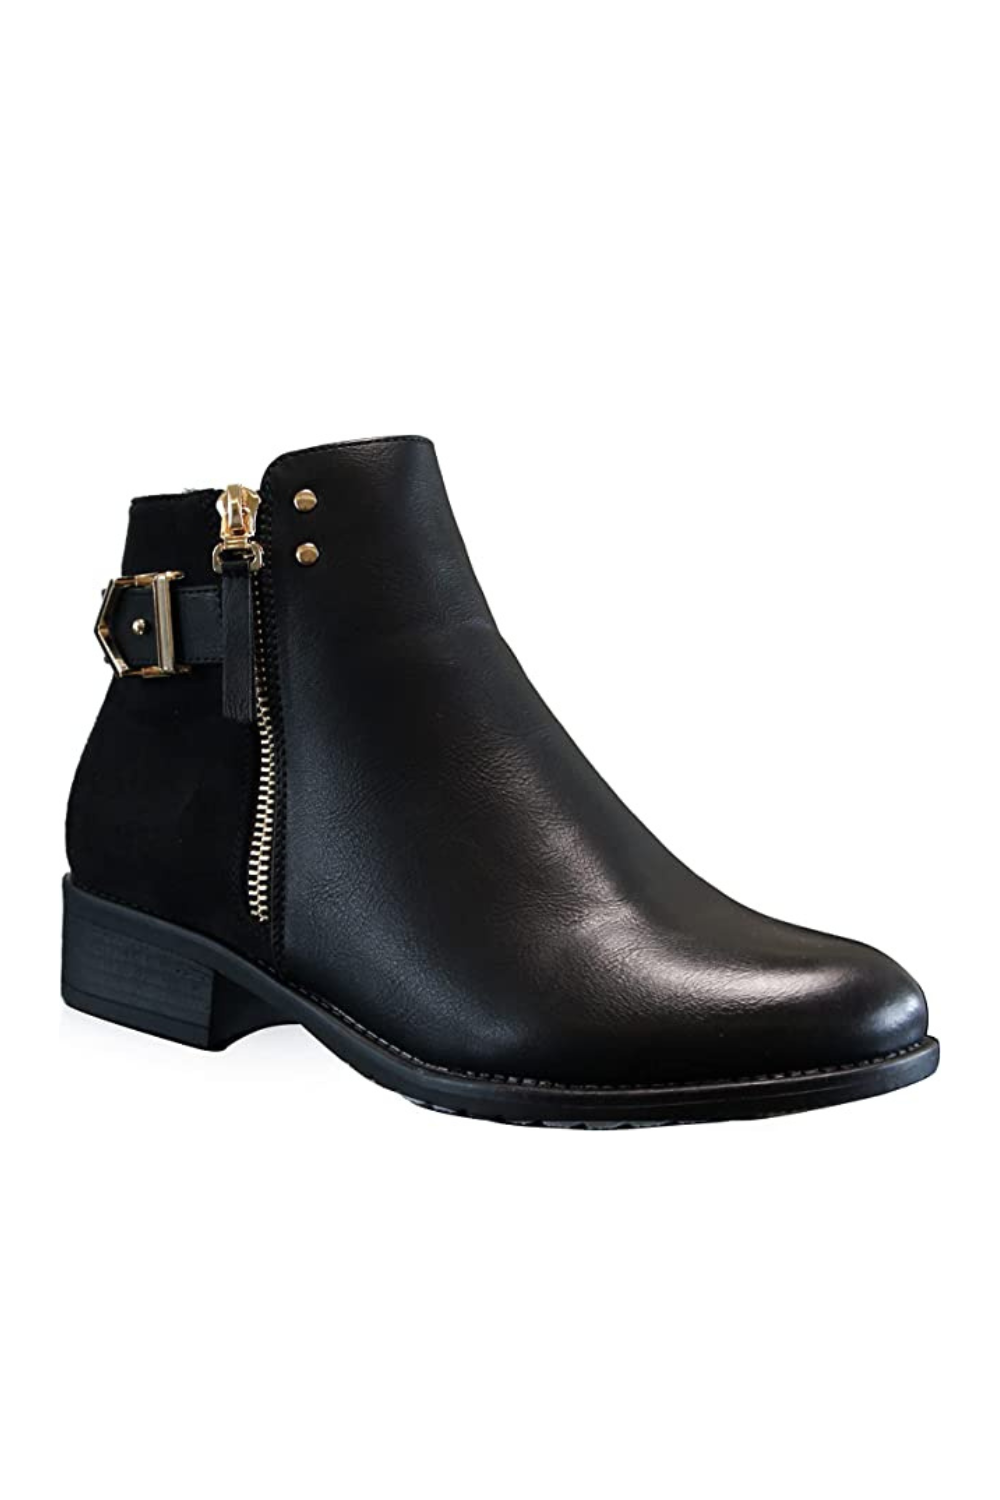 Women Ankle Boots, Low Heel with Zip Boots Black A9008 – IVACHY